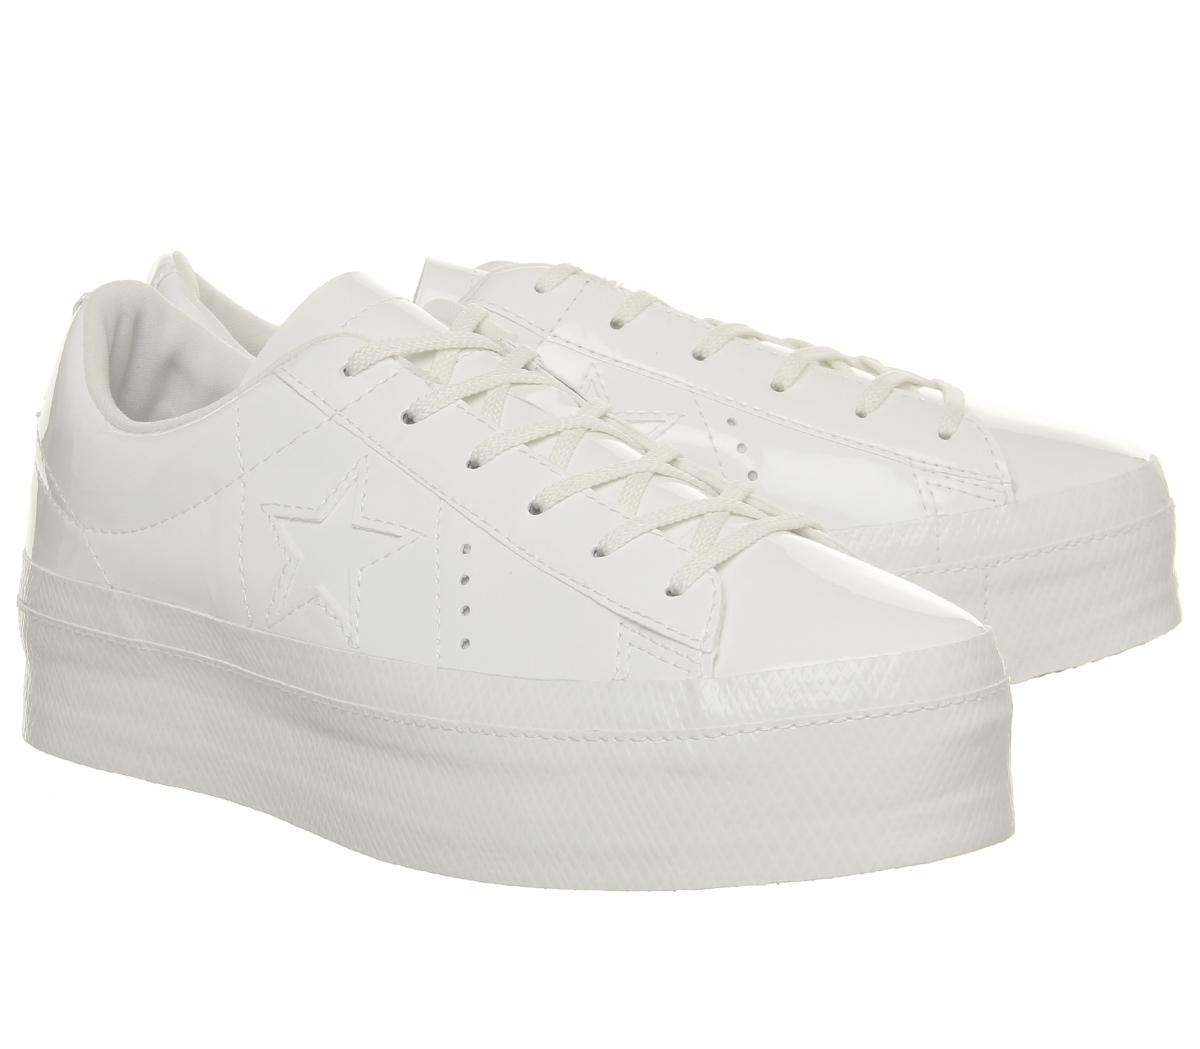 Converse Leather One Star Platform Trainers in Vintage White Patent ...